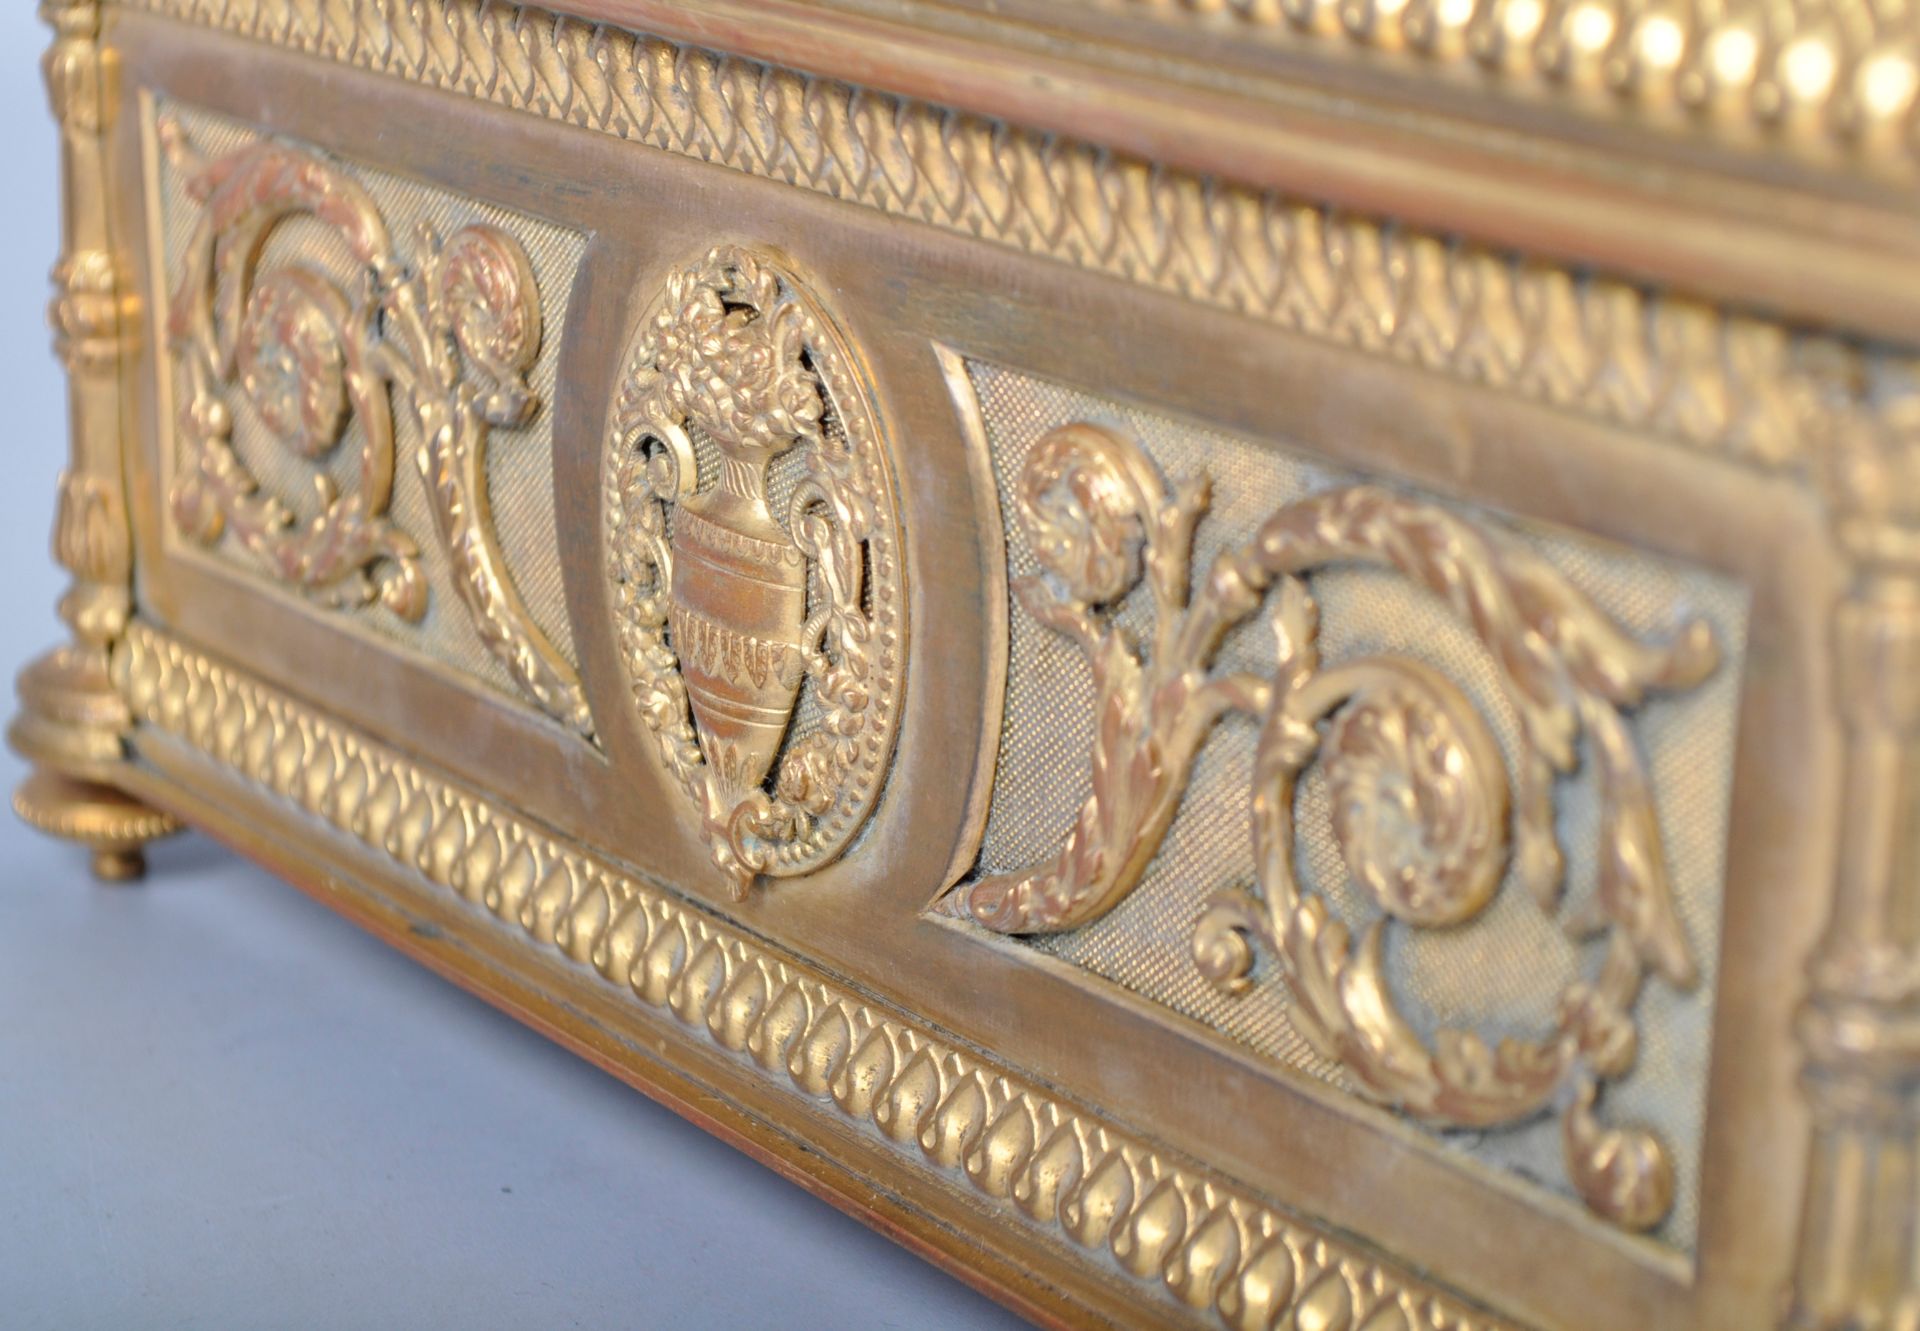 19TH CENTURY FRENCH PALAIS ROYALE GILDED ORMOLU CASKET - Image 6 of 6